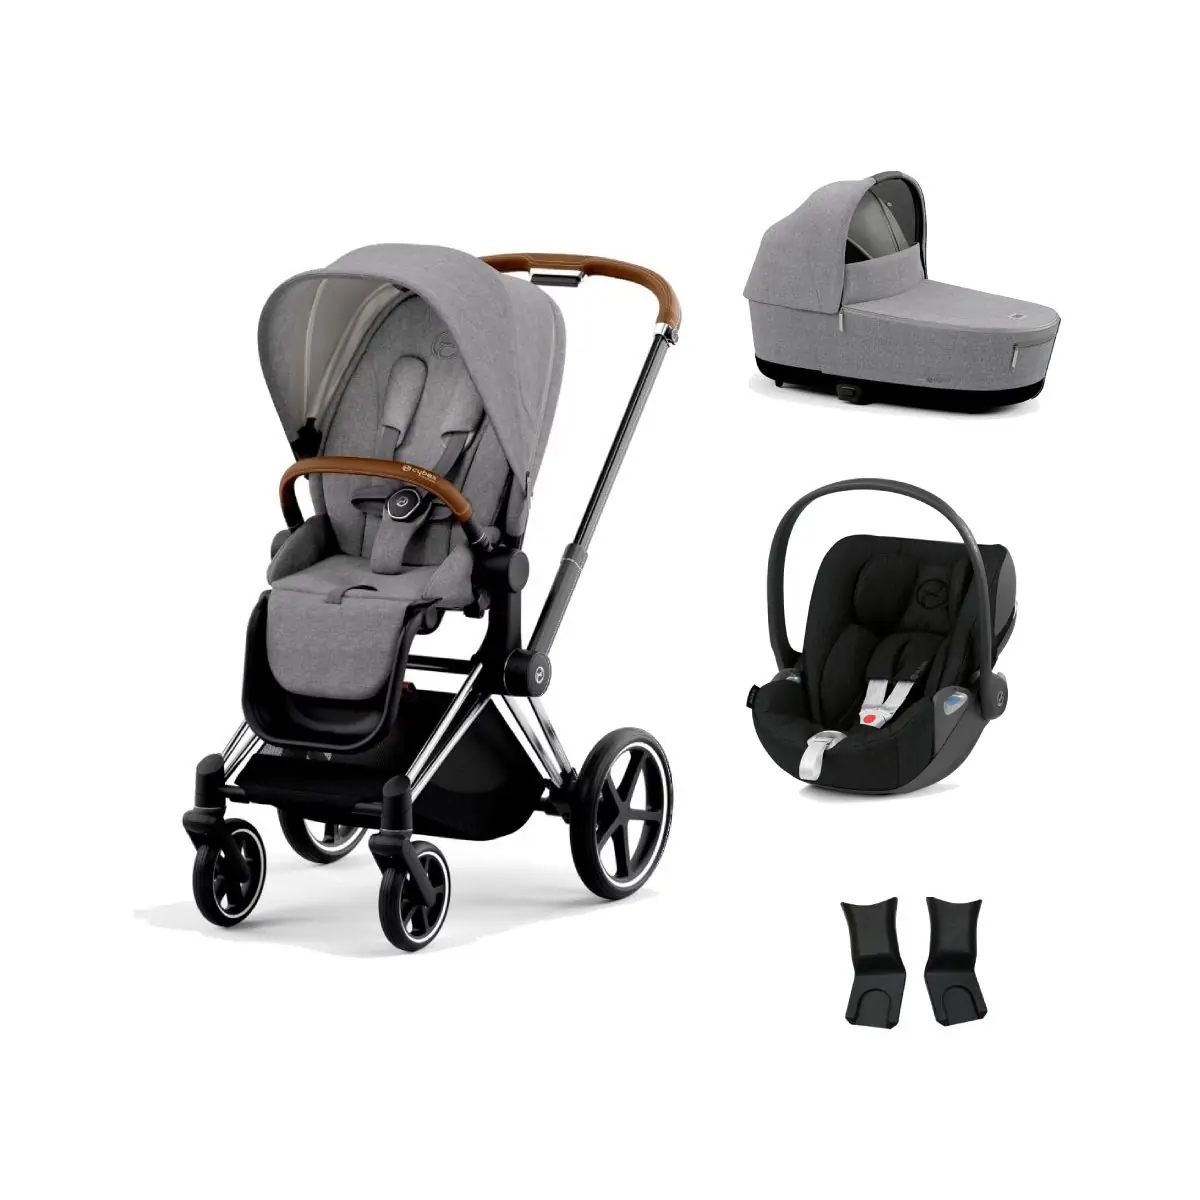 Image of Cybex Priam Chrome Pushchair with Lux Carry Cot & Cloud Z Car Seat - Manhattan Grey Plus/Brown